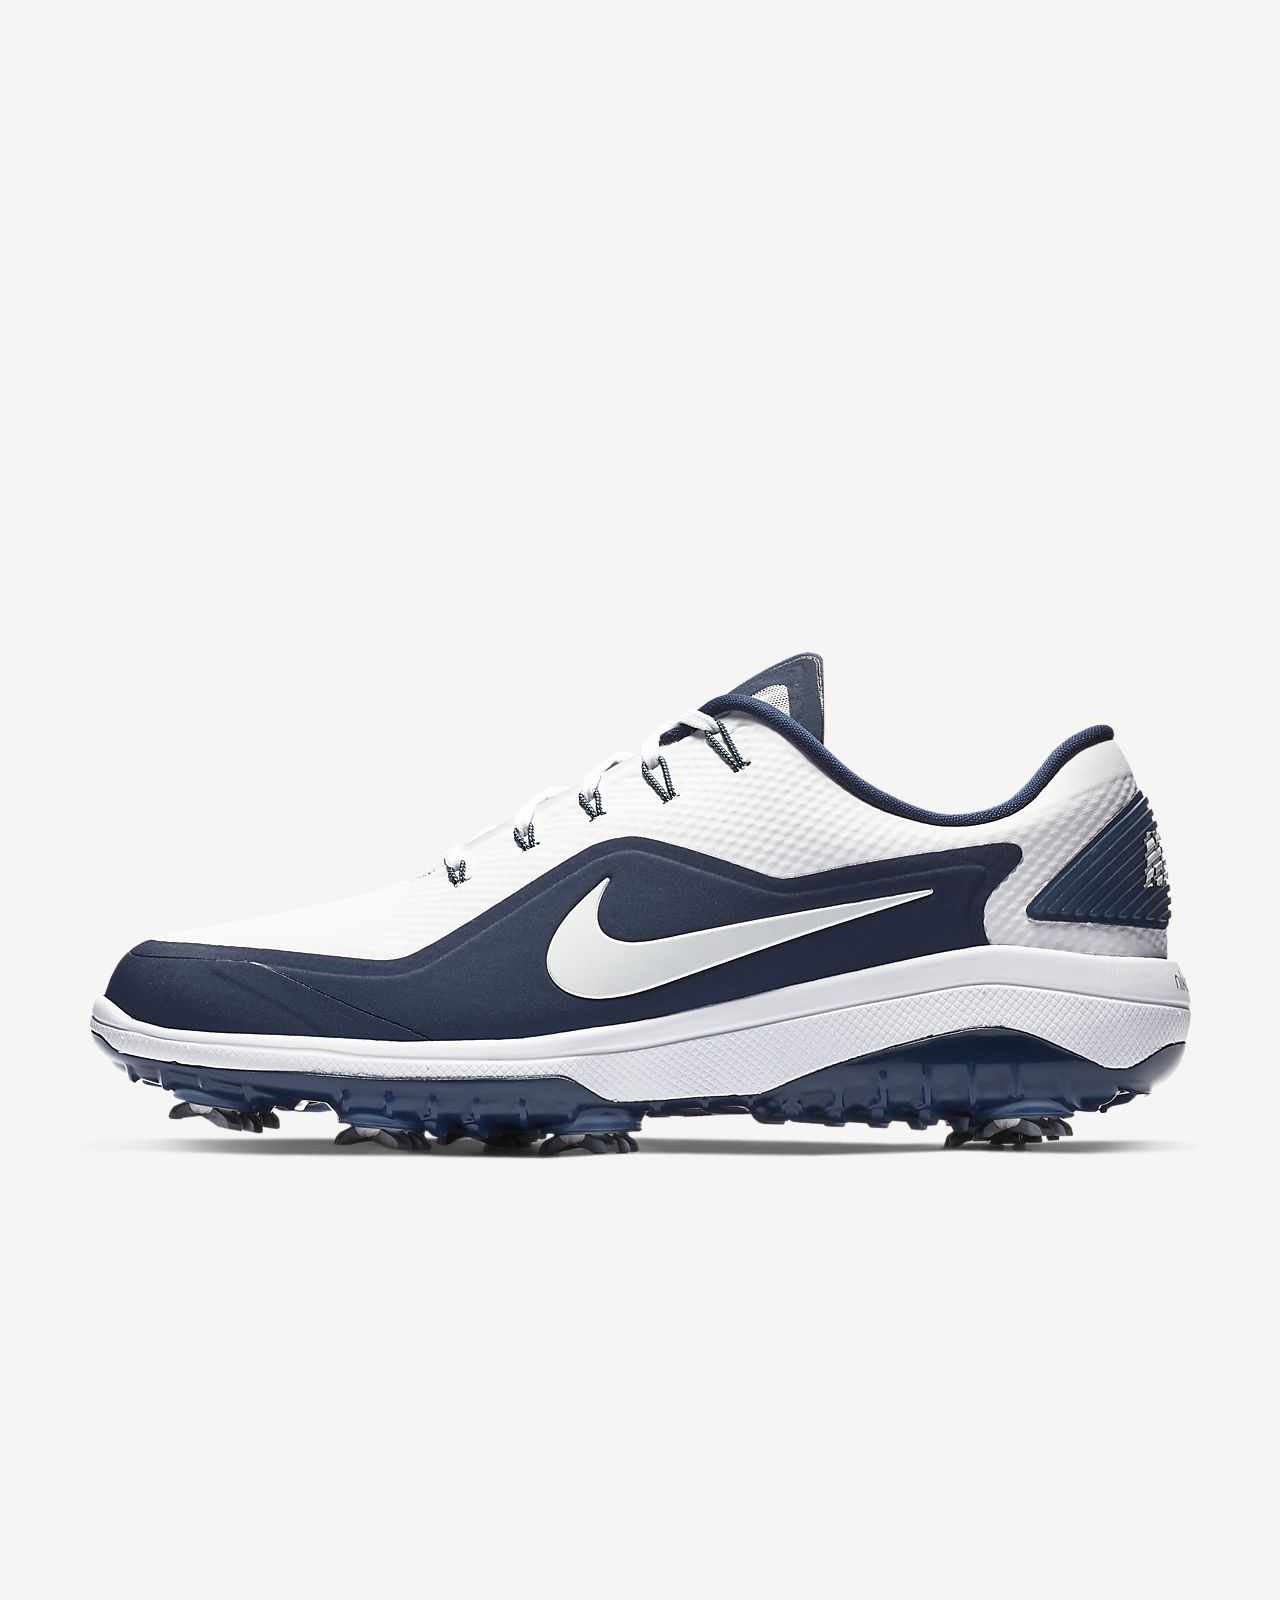 Soldes > chaussures golf nike homme > en stock